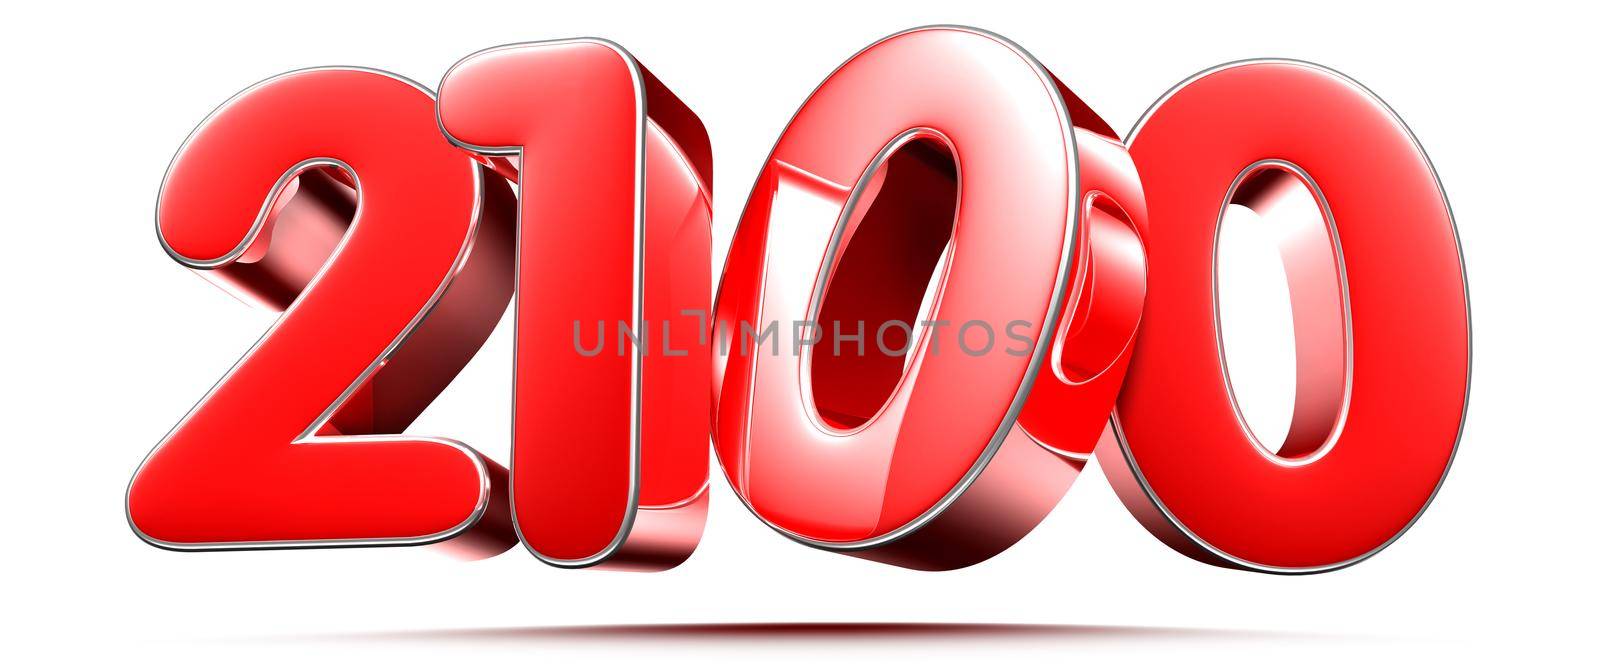 Rounded red numbers 2100 on white background 3D illustration with clipping path by thitimontoyai